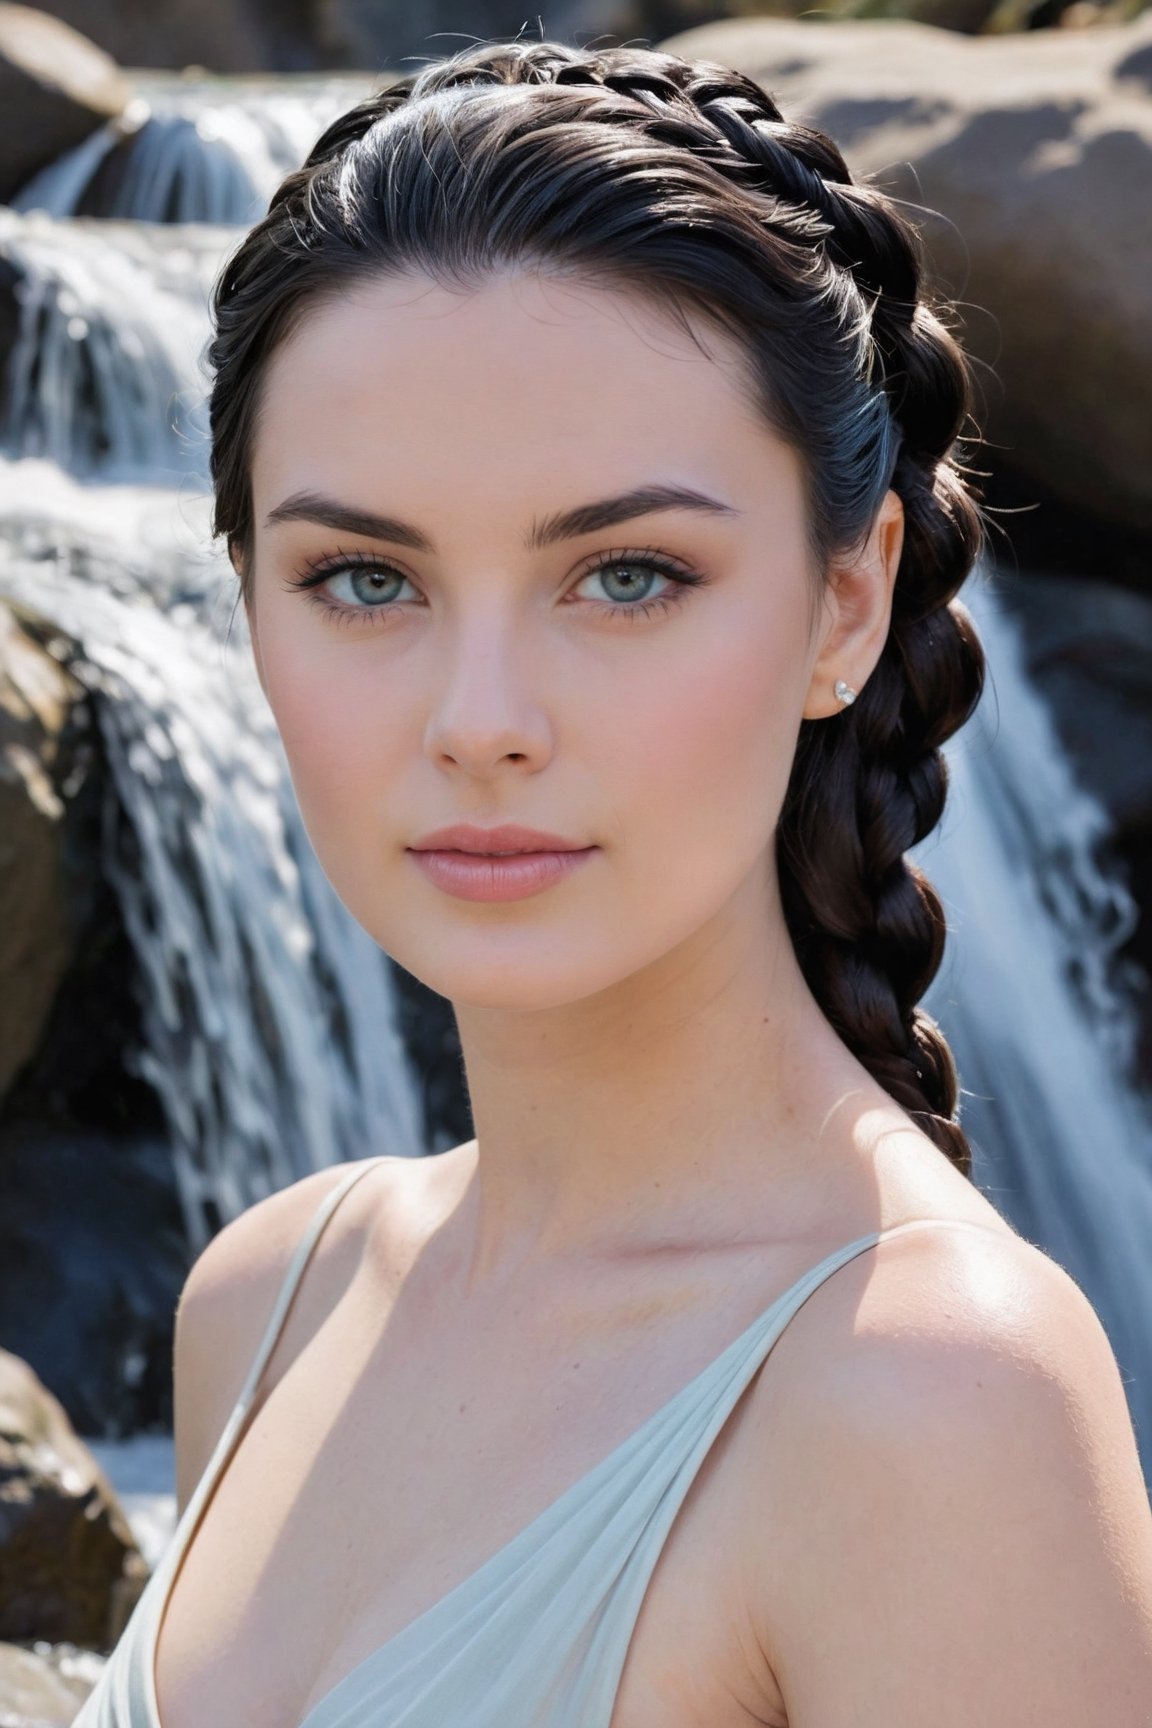 headshot,Nudity,Naked,Nude,No Clothes,Blue-black hair,face similar to Grace Kelly,Russian,pale skin,Waterfall braid Hairstyle,Natural-looking makeup,21 year old,Boyish_normal_breasts,headshot,Sunny Day Spring,Posing for a photo



